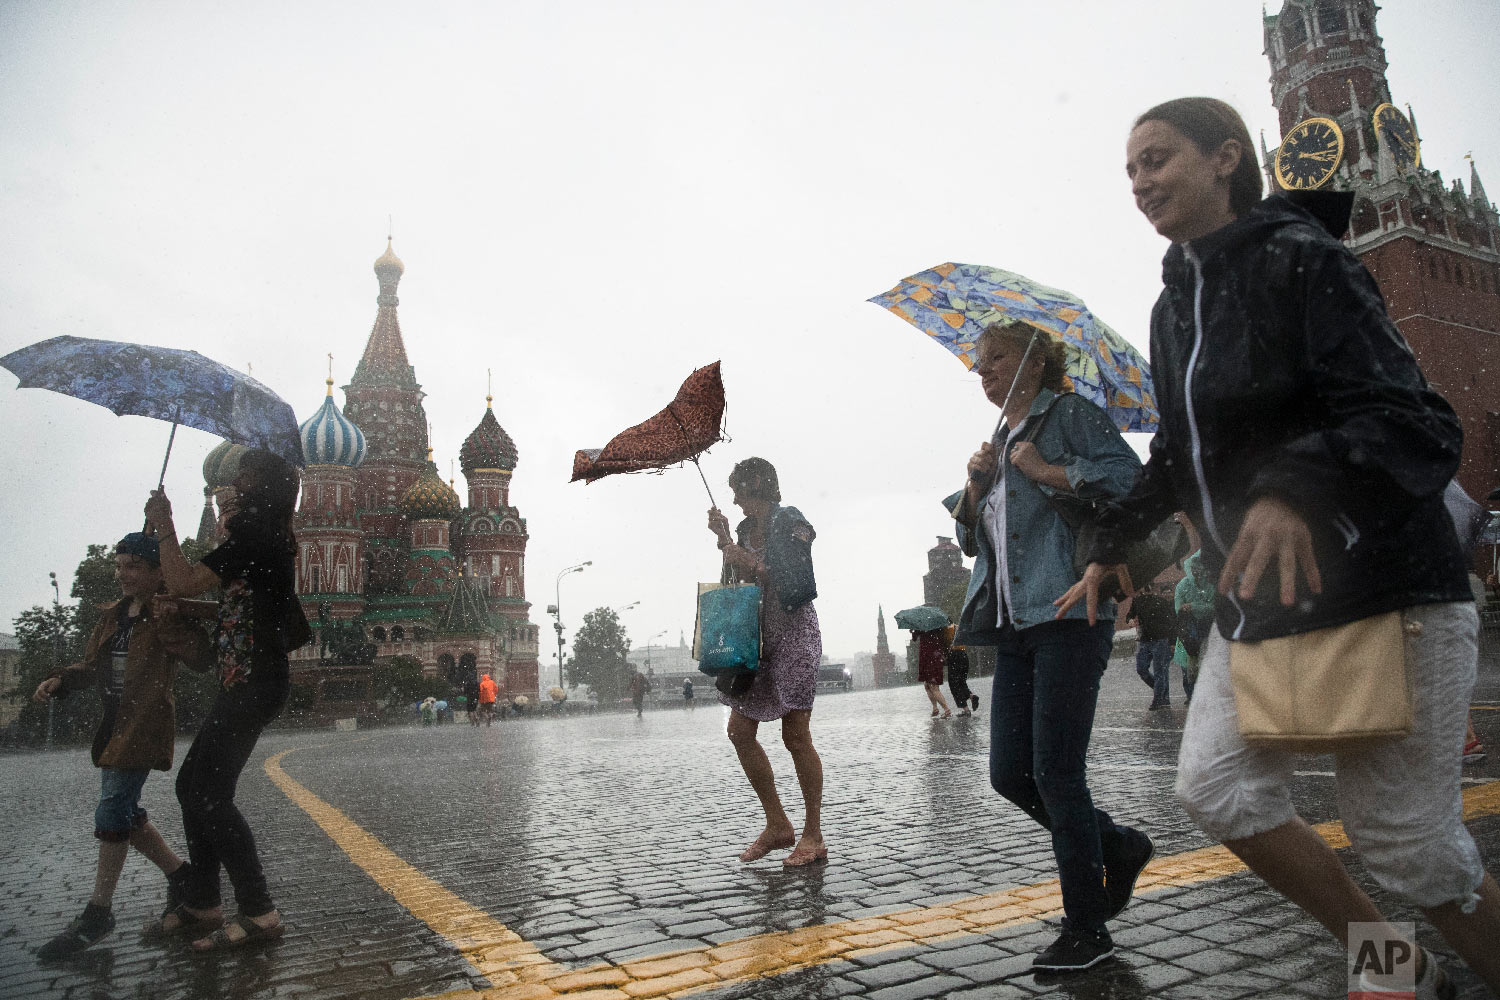  Tourists take cover from a heavy rain under umbrellas in Red Square with the with St. Basil's Cathedral, left, and the Spasskaya Tower, right, in the background, in Moscow, Russia on June 30, 2018. (AP Photo/Pavel Golovkin) 